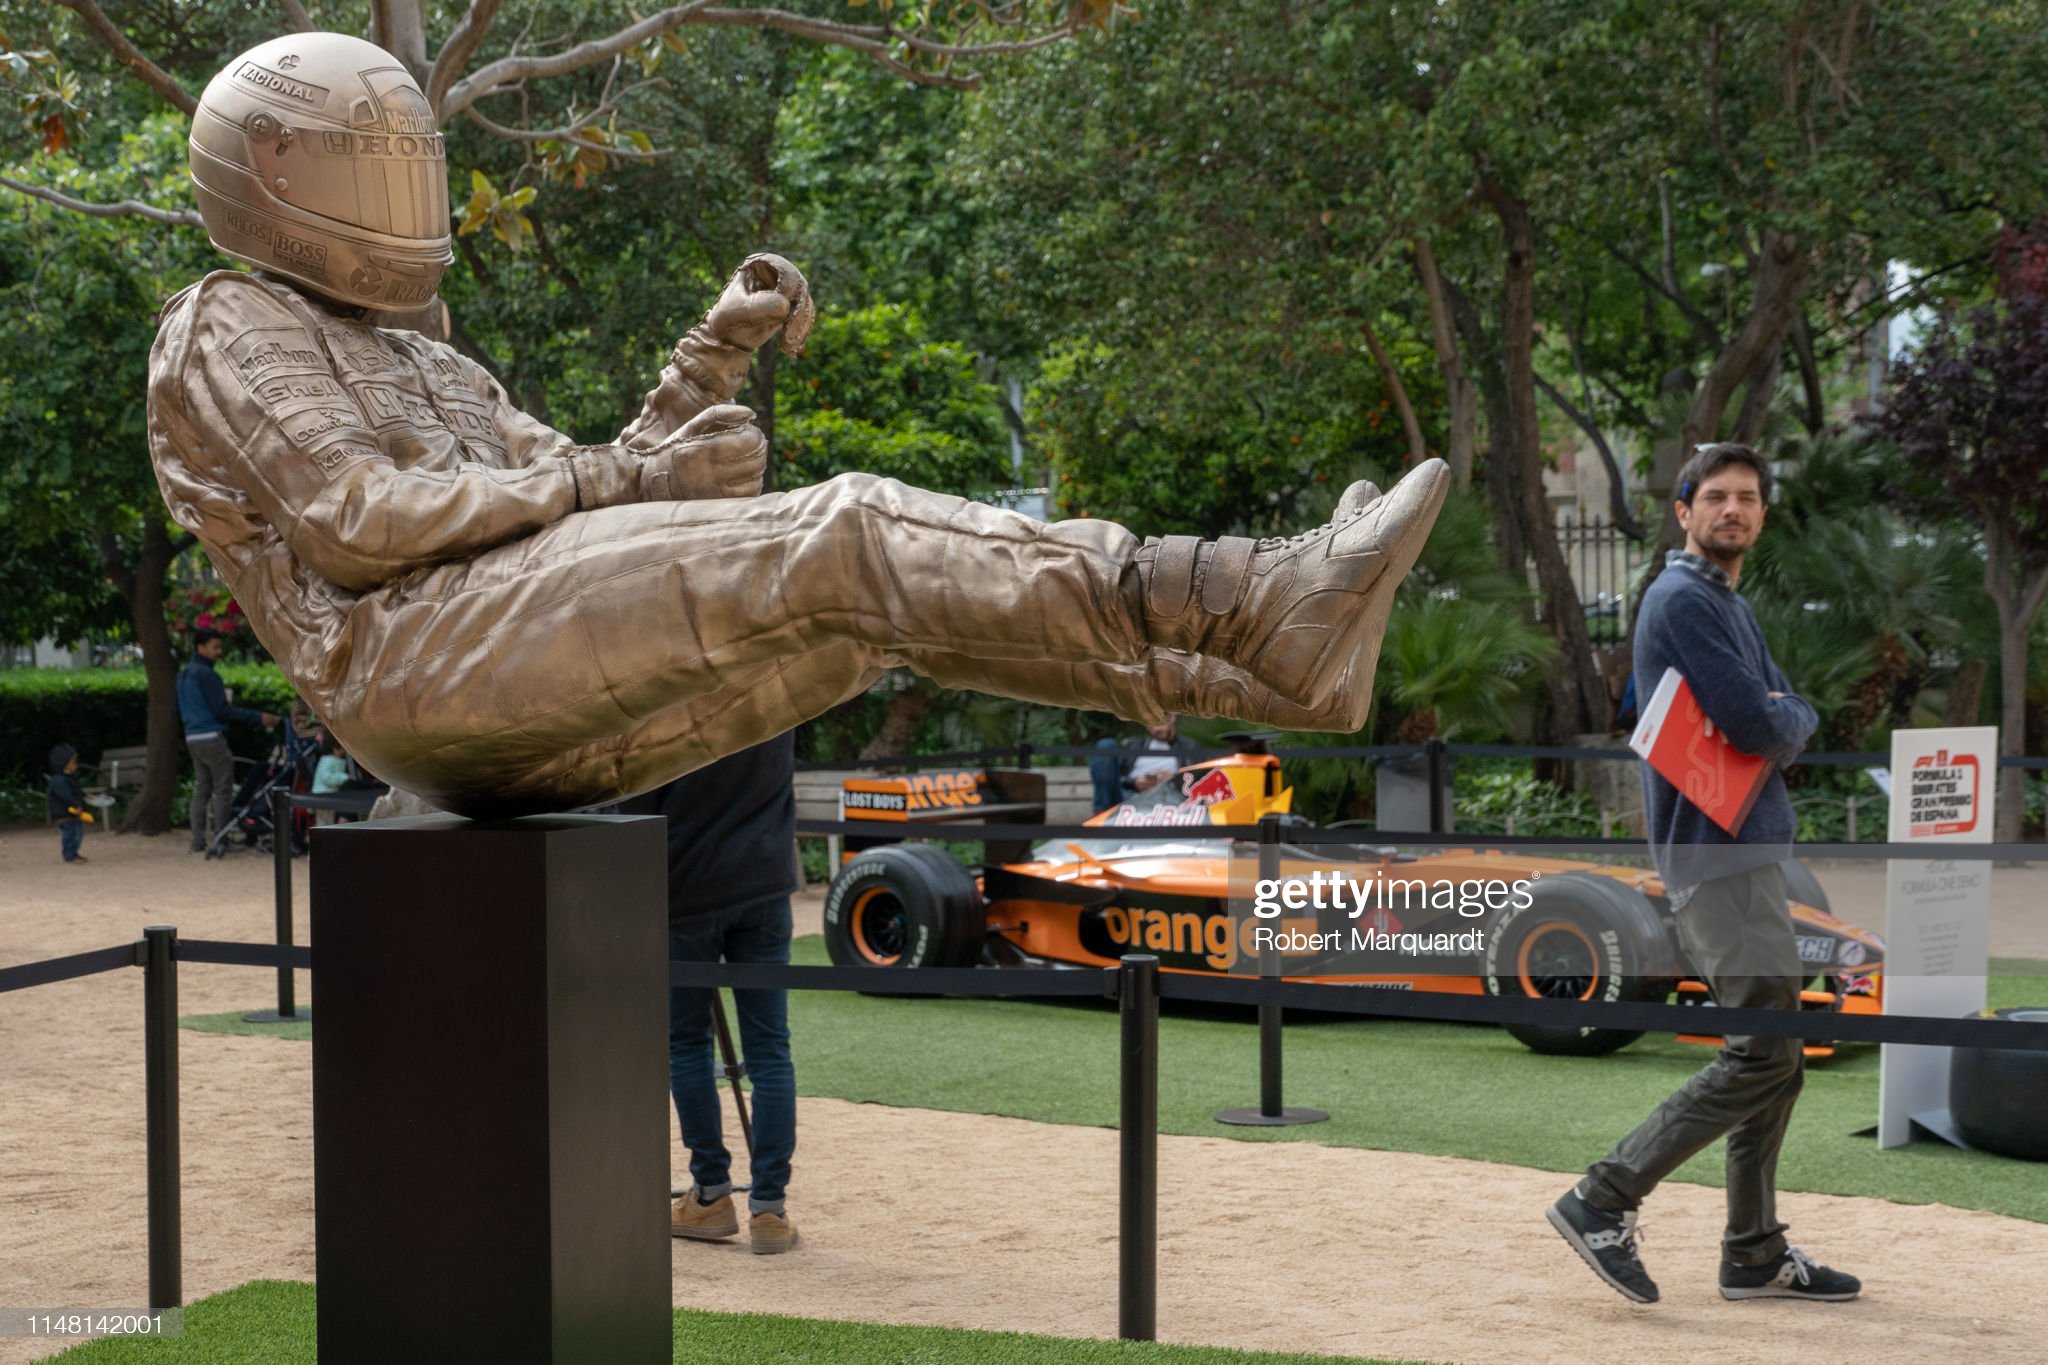 The public attends a Ayrton Senna's sculpture tribute inauguration on the 25th anniversary of his death on May 08, 2019 in Barcelona, Spain.